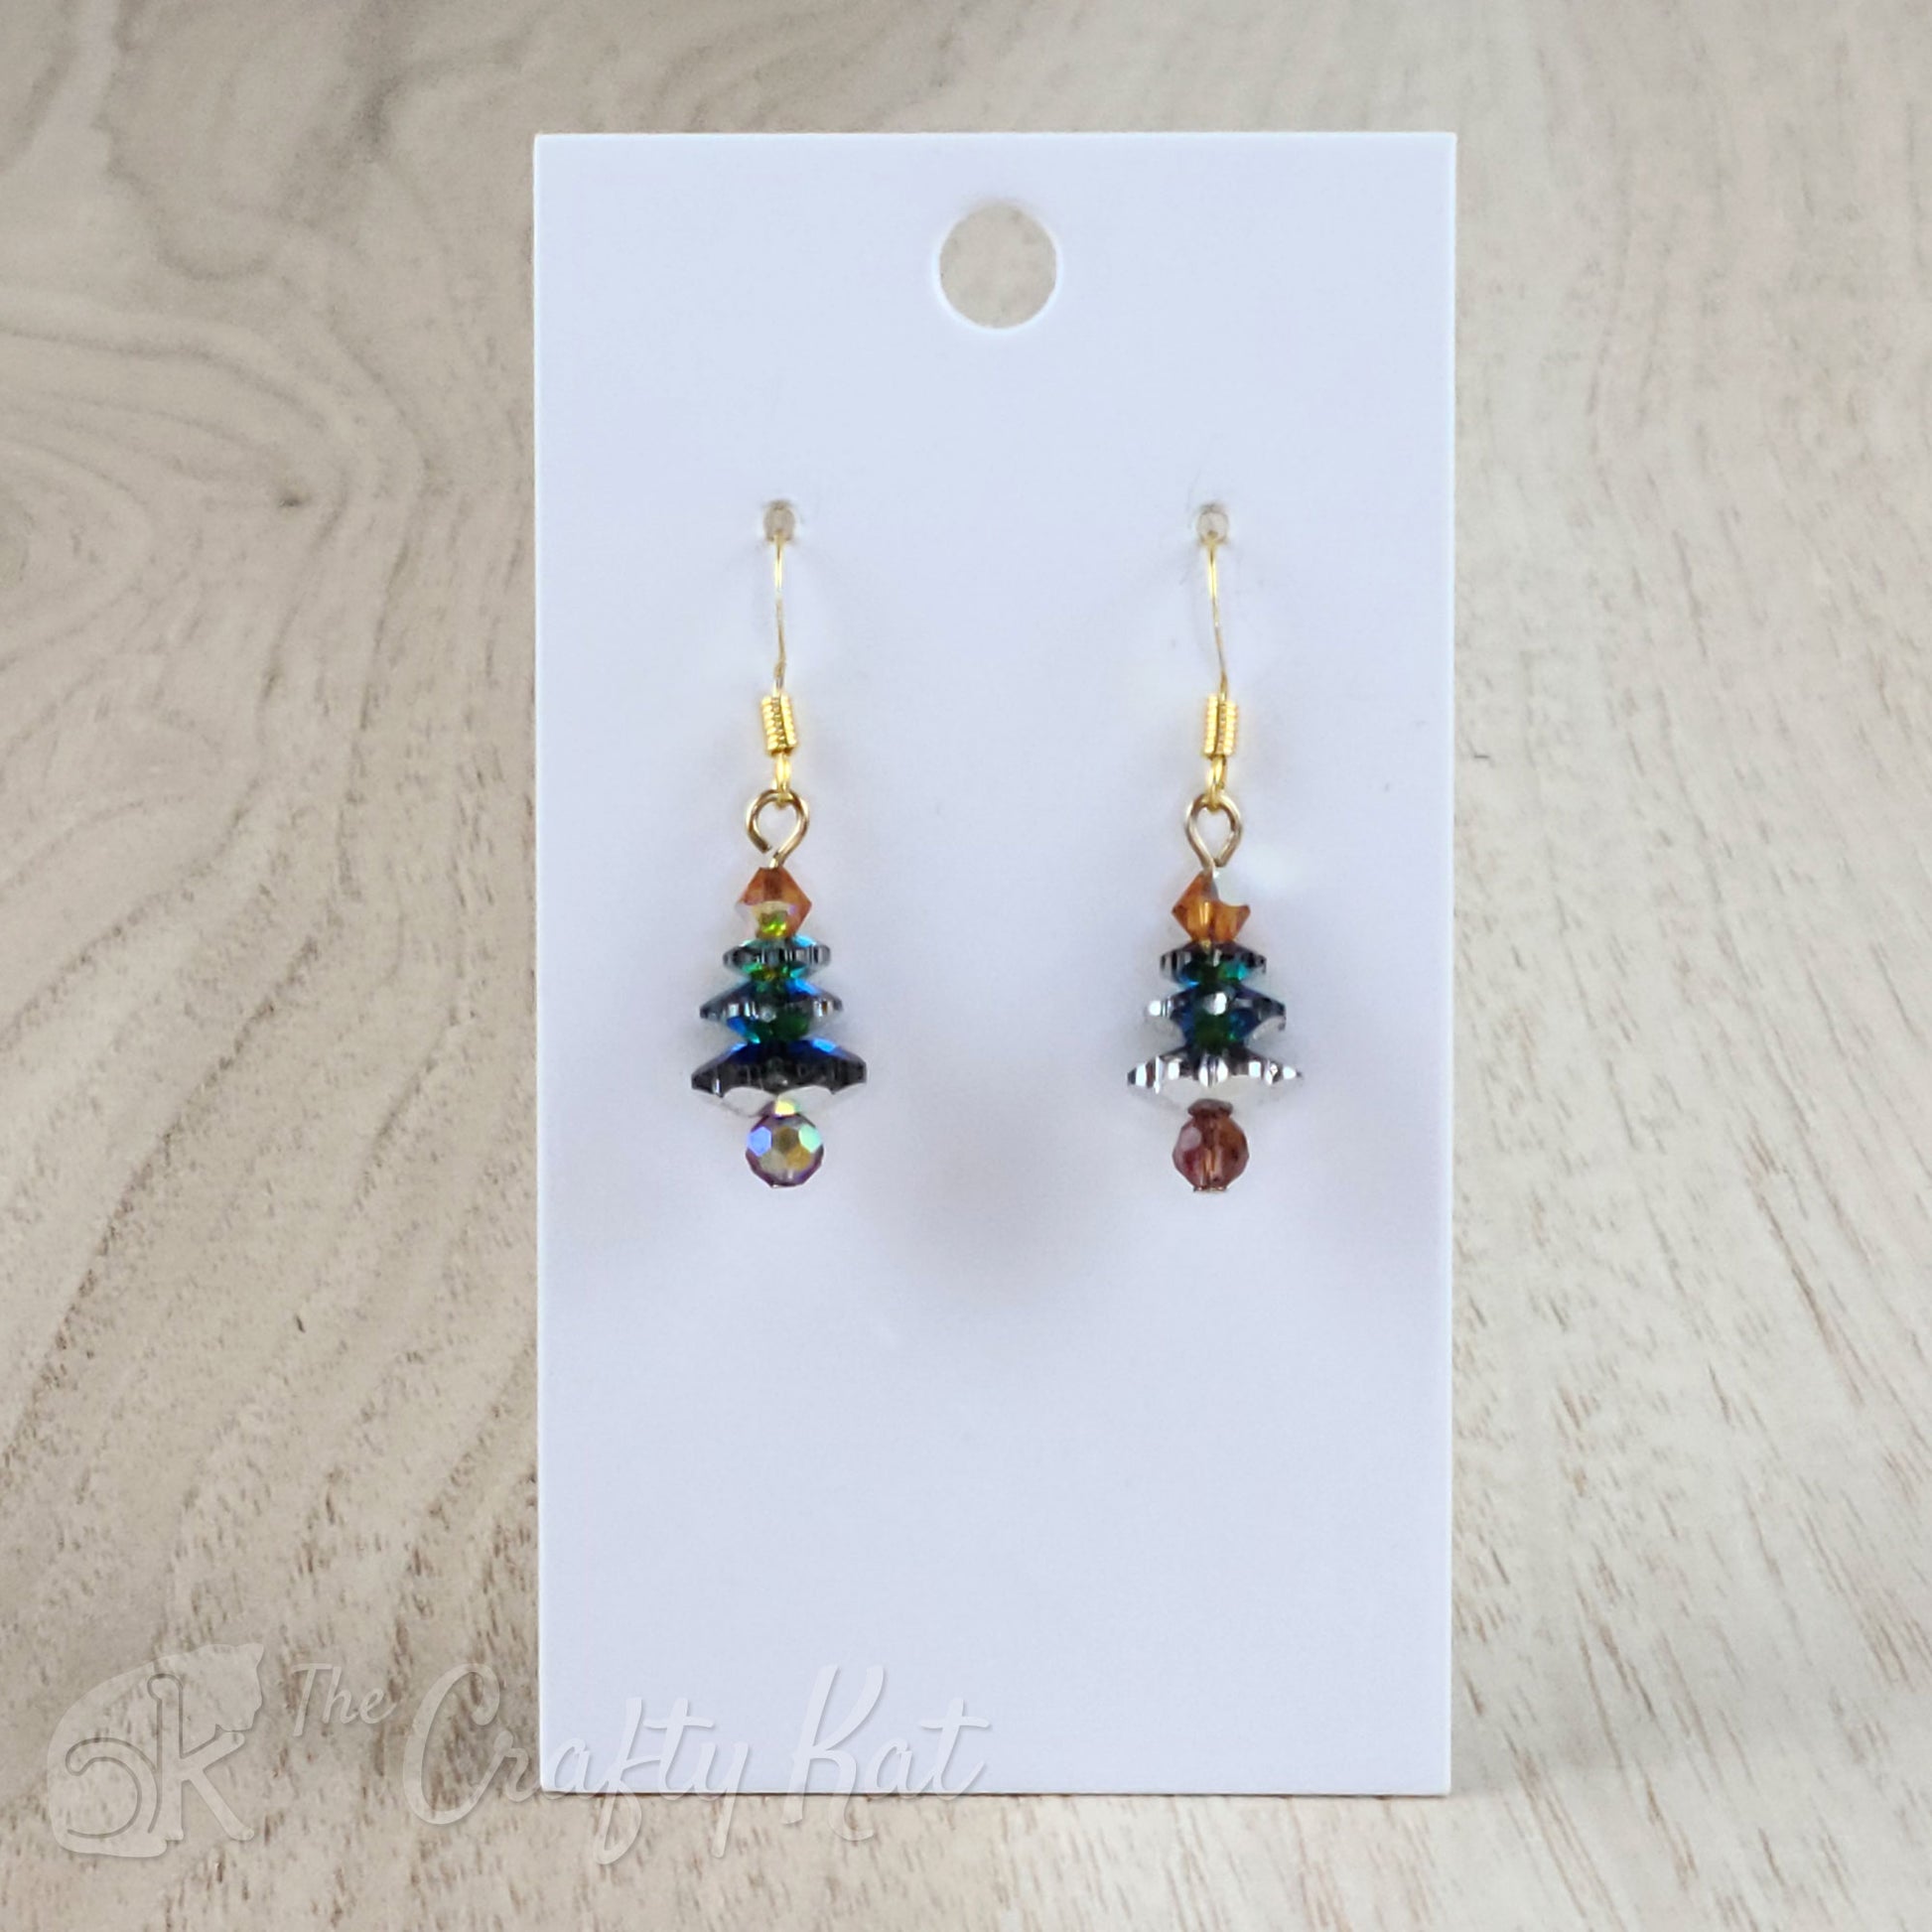 A pair of earring drops made of faceted crystal beads, each drop forming the shape of a holiday tree. This variation features a deep purple base, iridescent emerald branches, and a gold topper on gold-plated base metal.